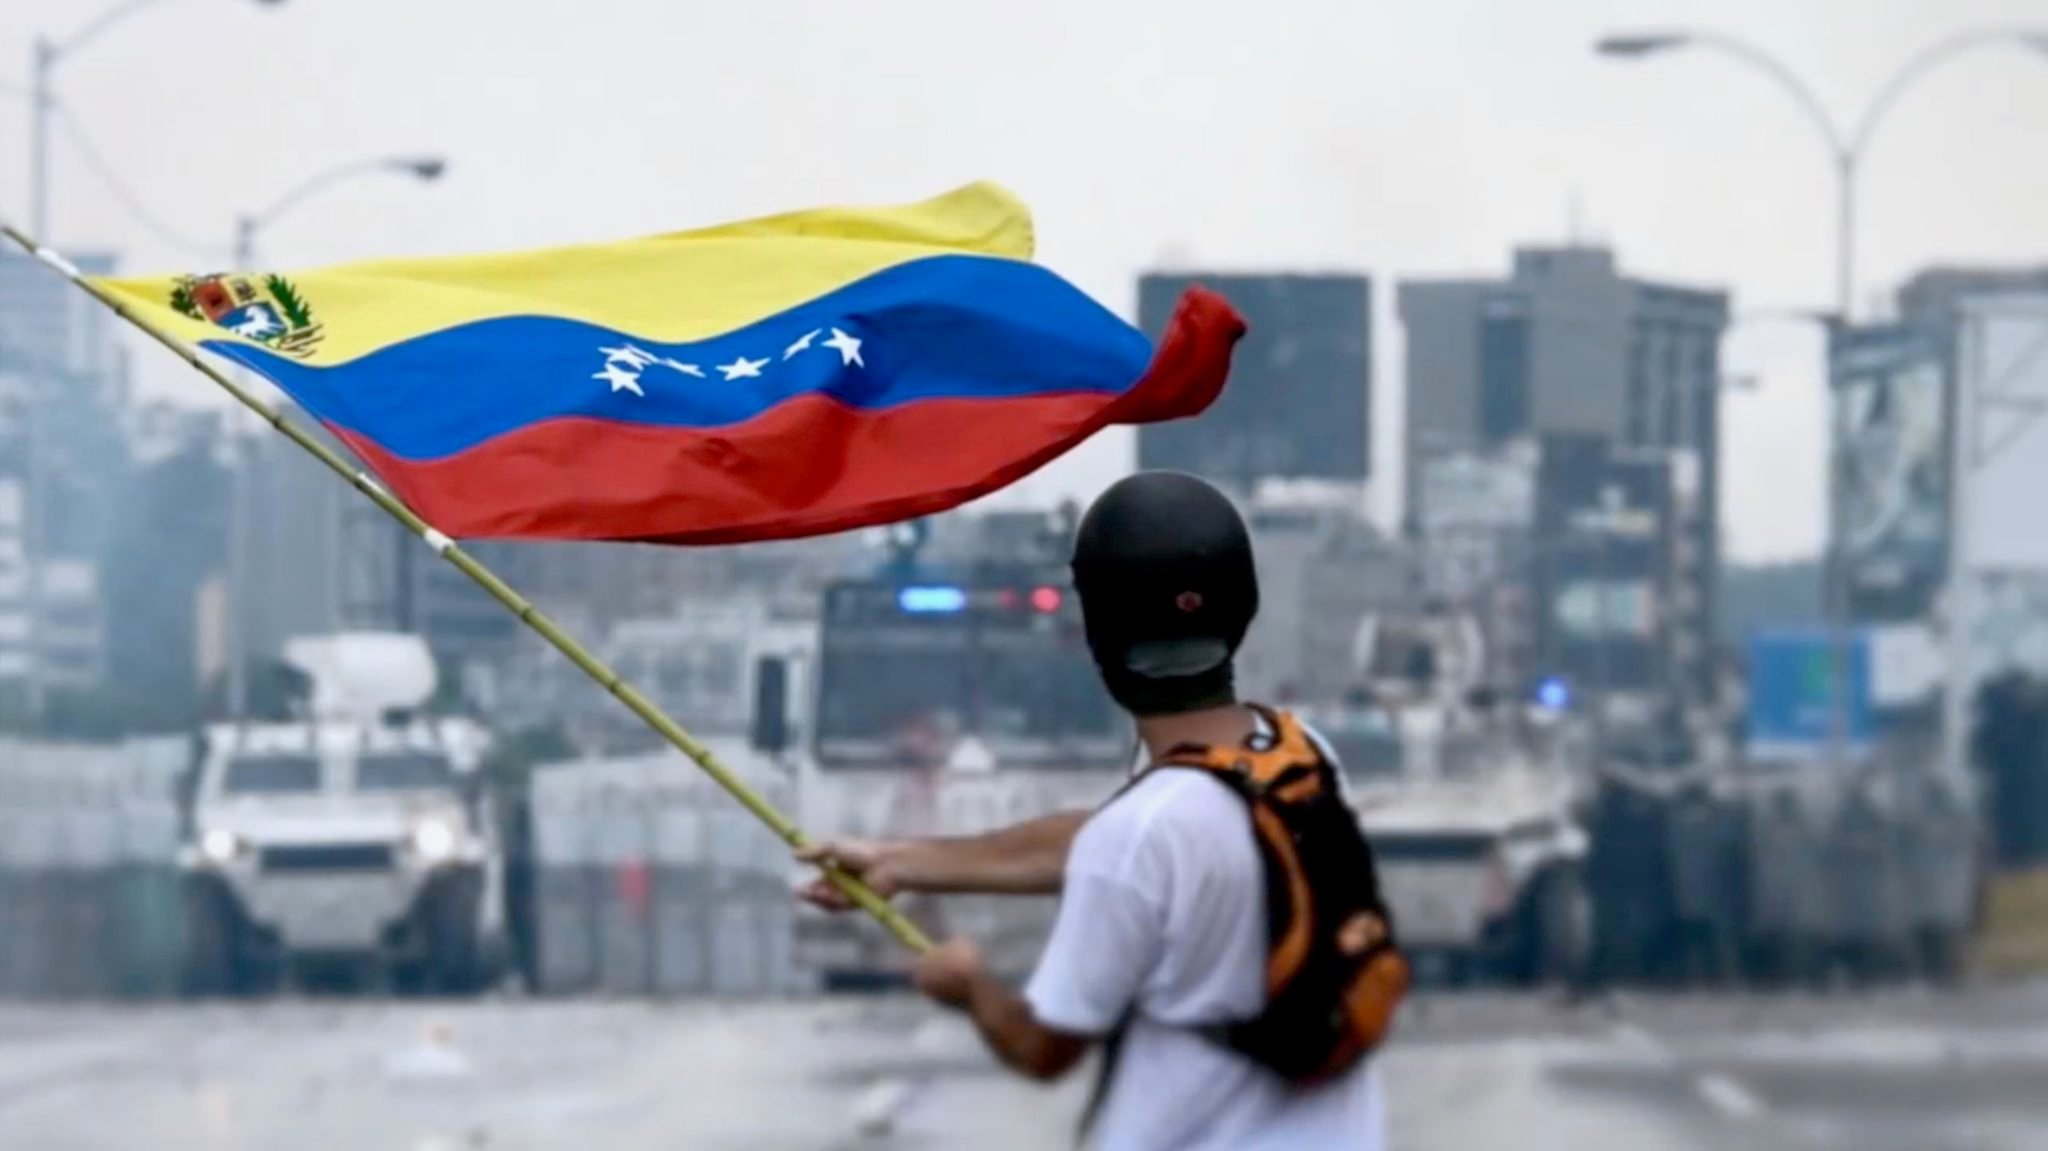 <p>A protestor facing Venezuela’s national guard in May 2017 (image: <a href="https://commons.wikimedia.org/wiki/File:2017_Venezuelan_protests_flag.jpg" target="_blank" rel="noopener">Efecto Eco </a>)</p>